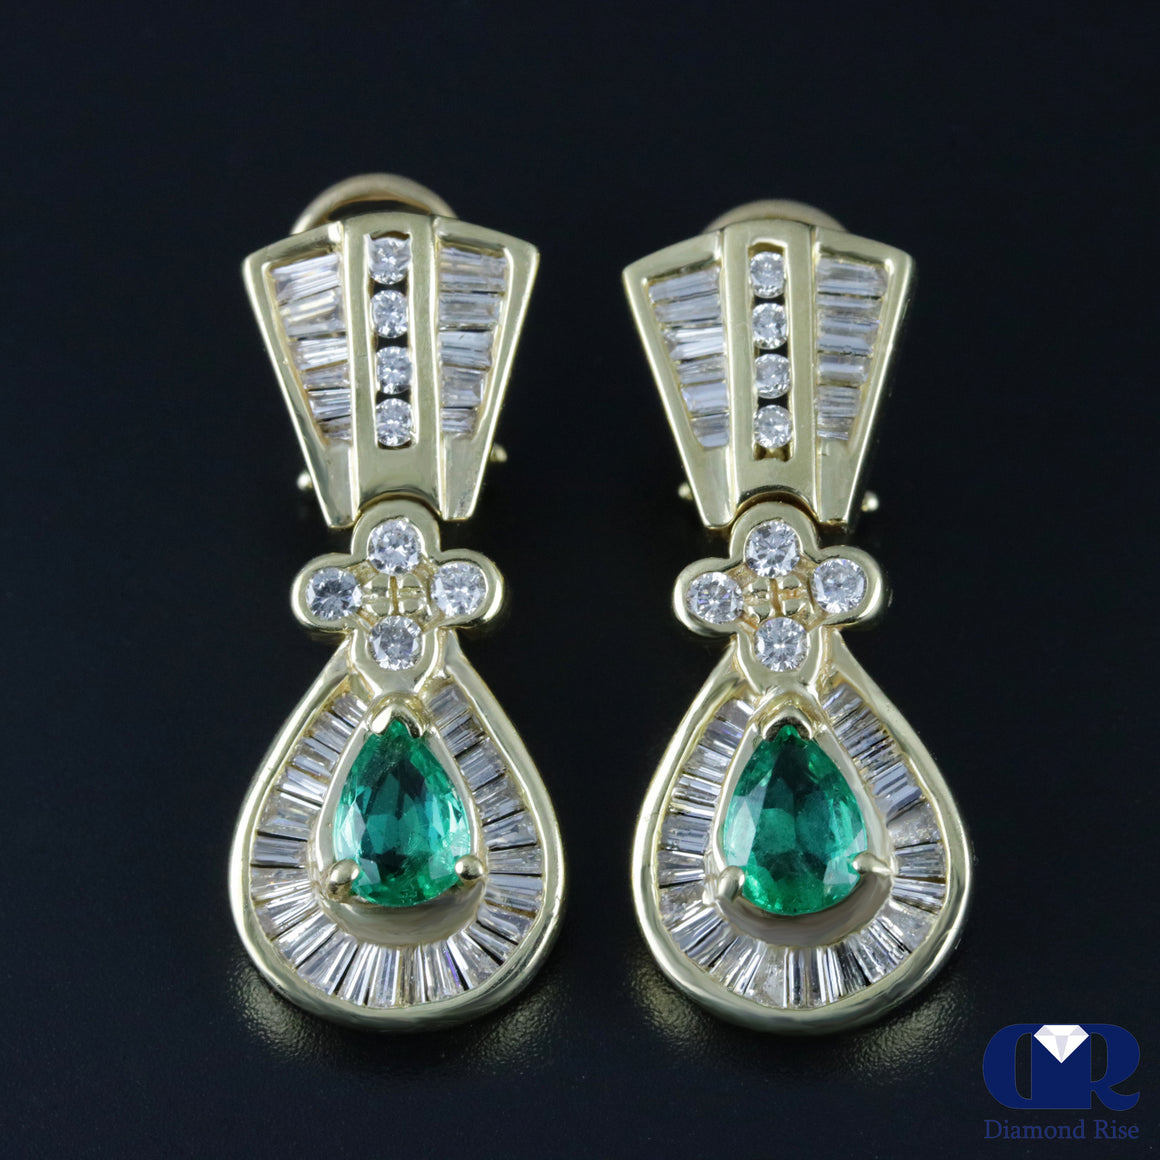 Pear Shaped Emerald & Diamond Earrings In 14K Yellow Gold With Omega Back - Diamond Rise Jewelry